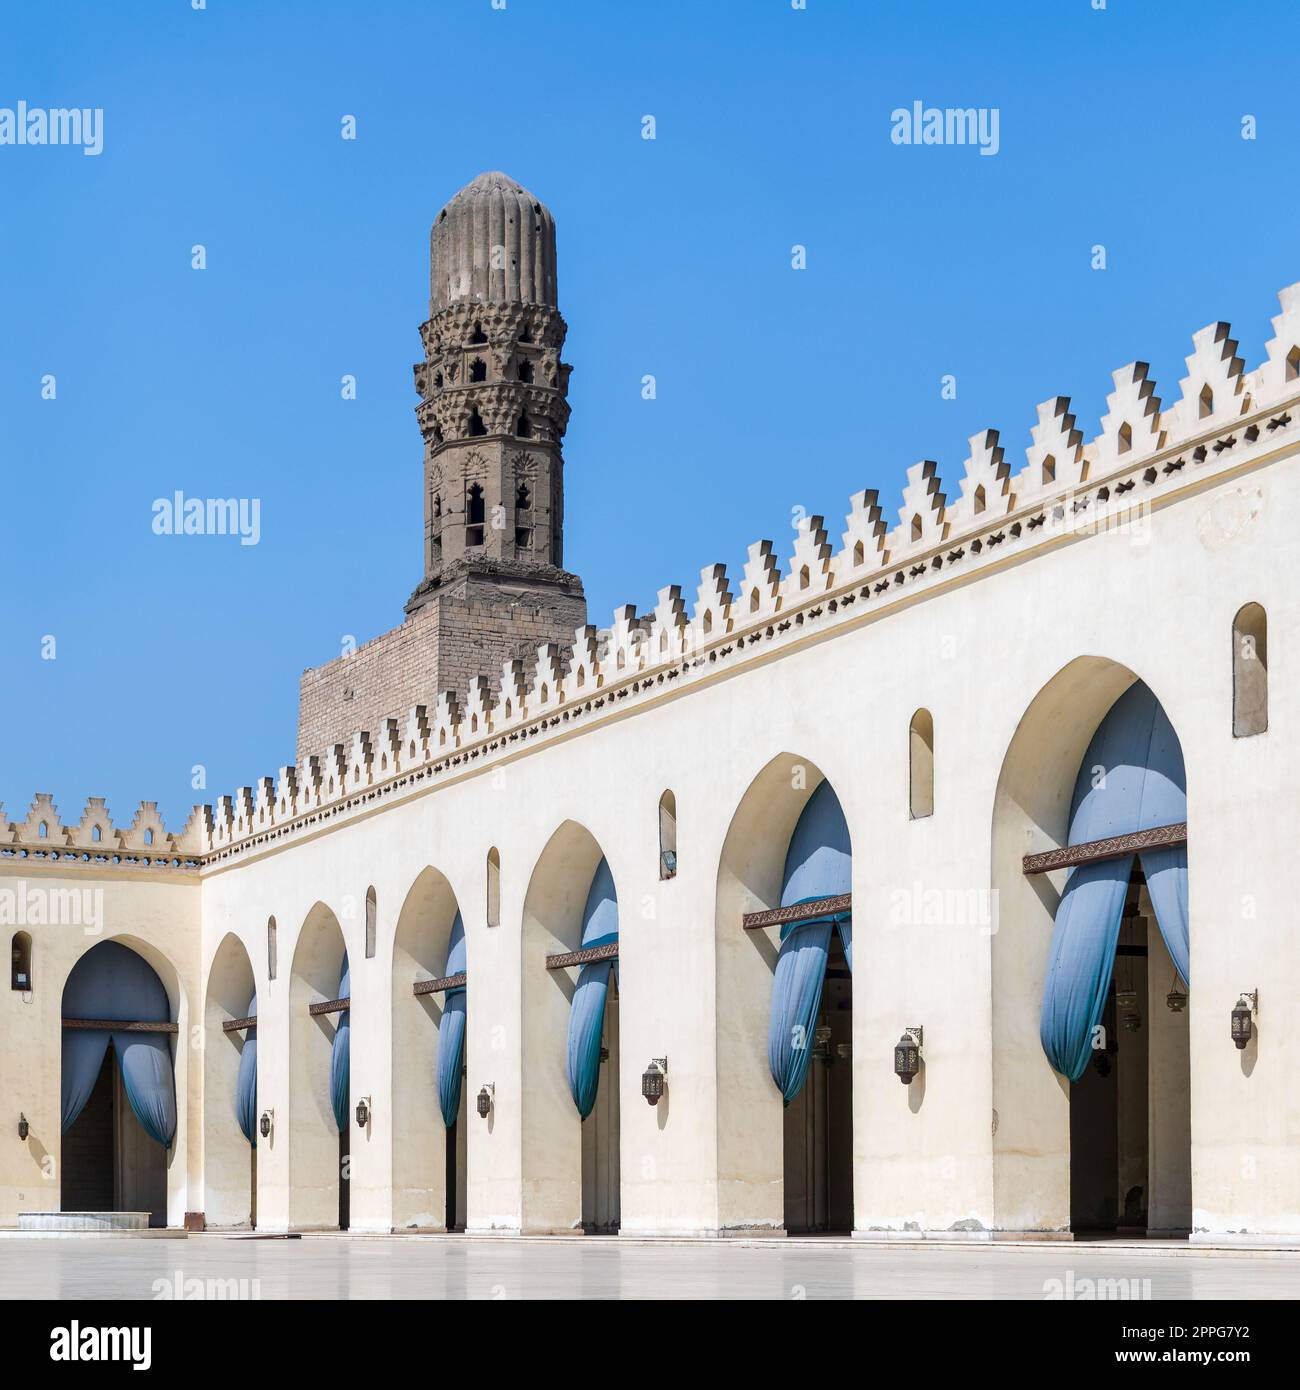 Minaret of historic Al Hakim Mosque known as The Enlightened Mosque, Moez Street, Old Cairo, Egypt Stock Photo